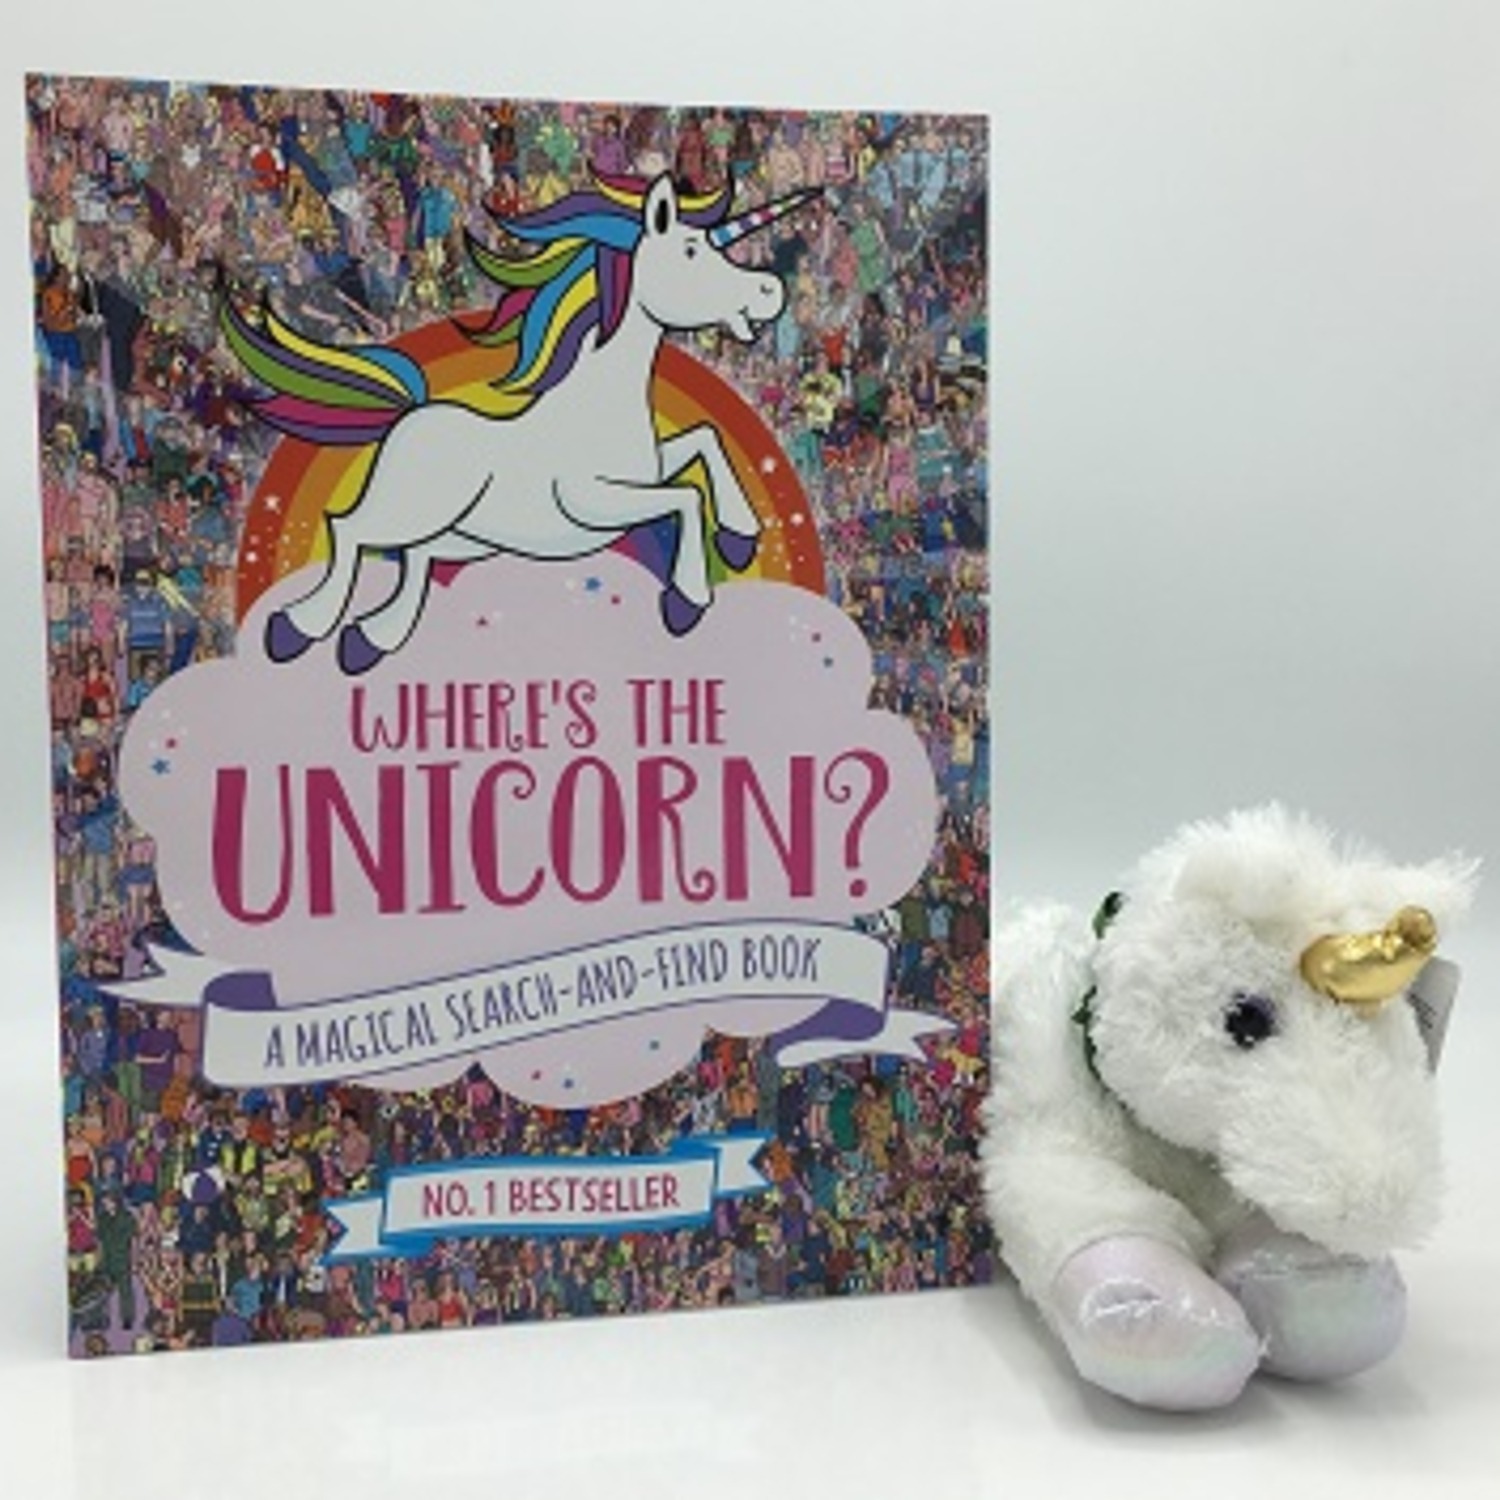 Where's the Unicorn and Unicorn Magical
  Search and Find Book